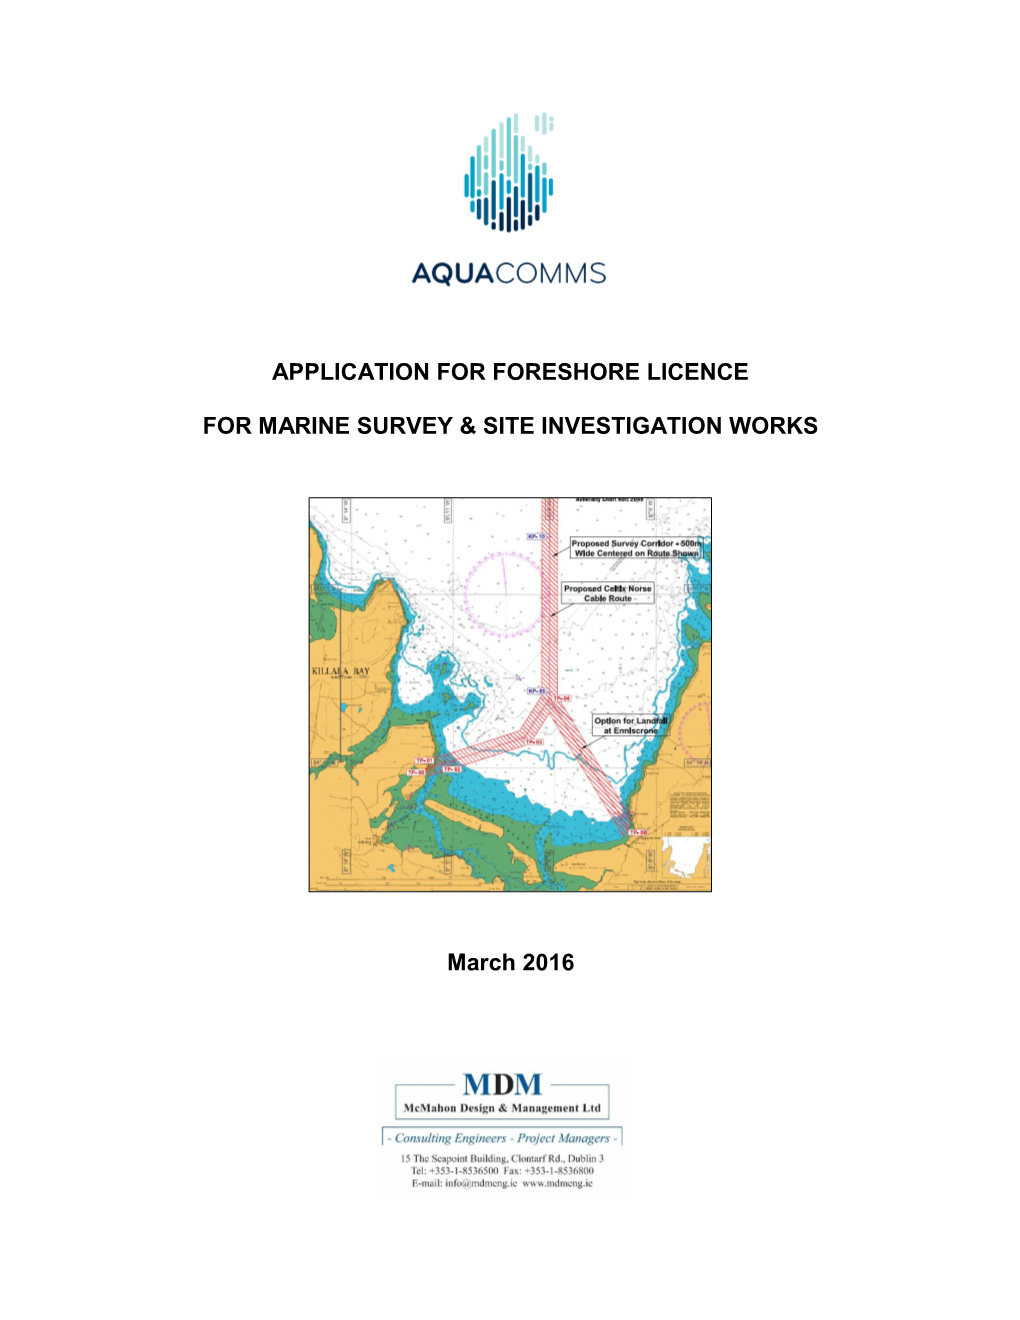 Application for Foreshore Licence for Marine Survey